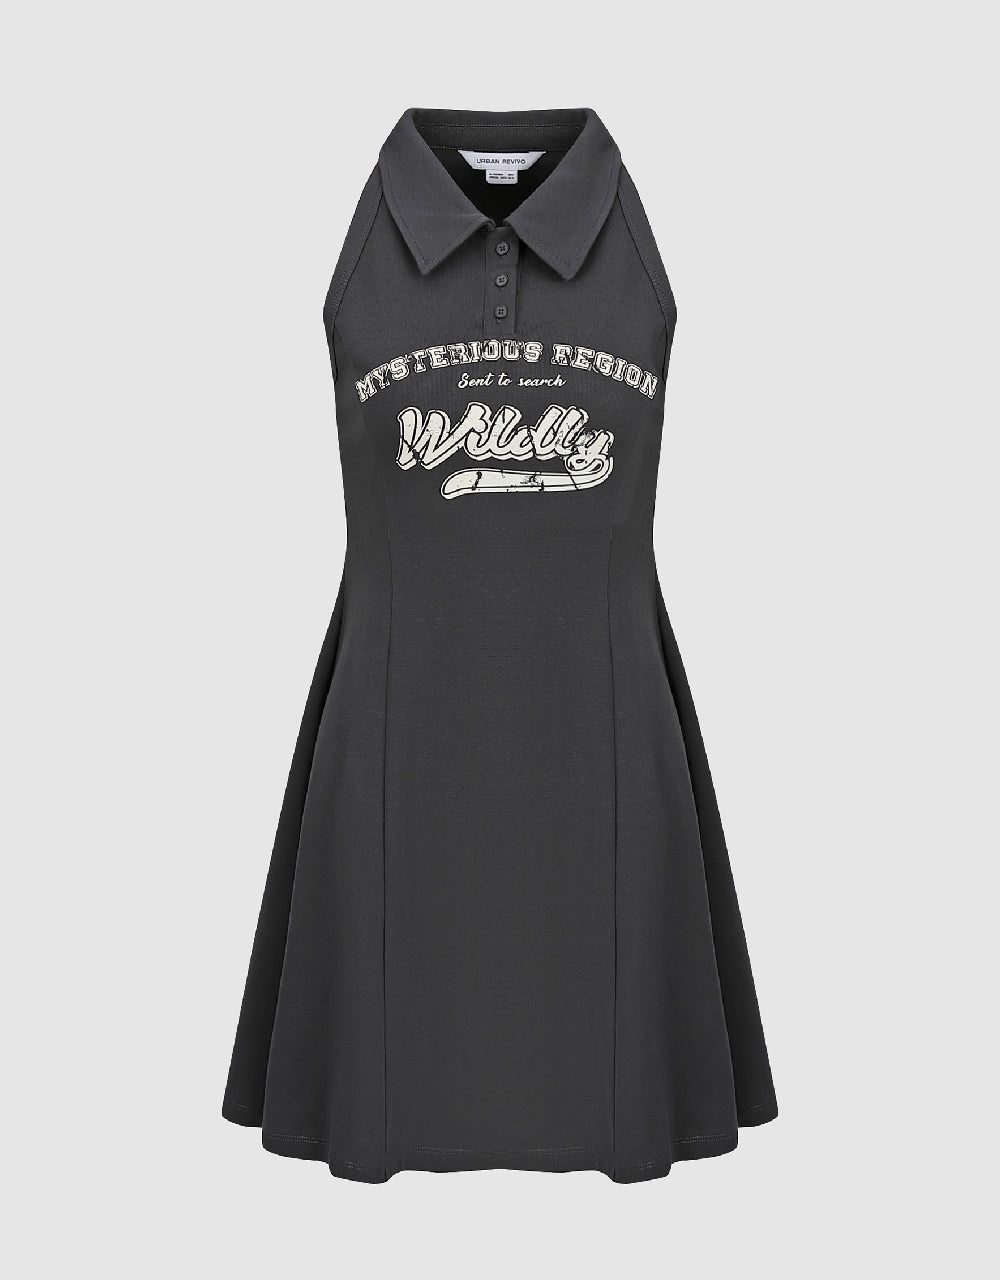 Letter Printed Sleeveless A-Line Dress